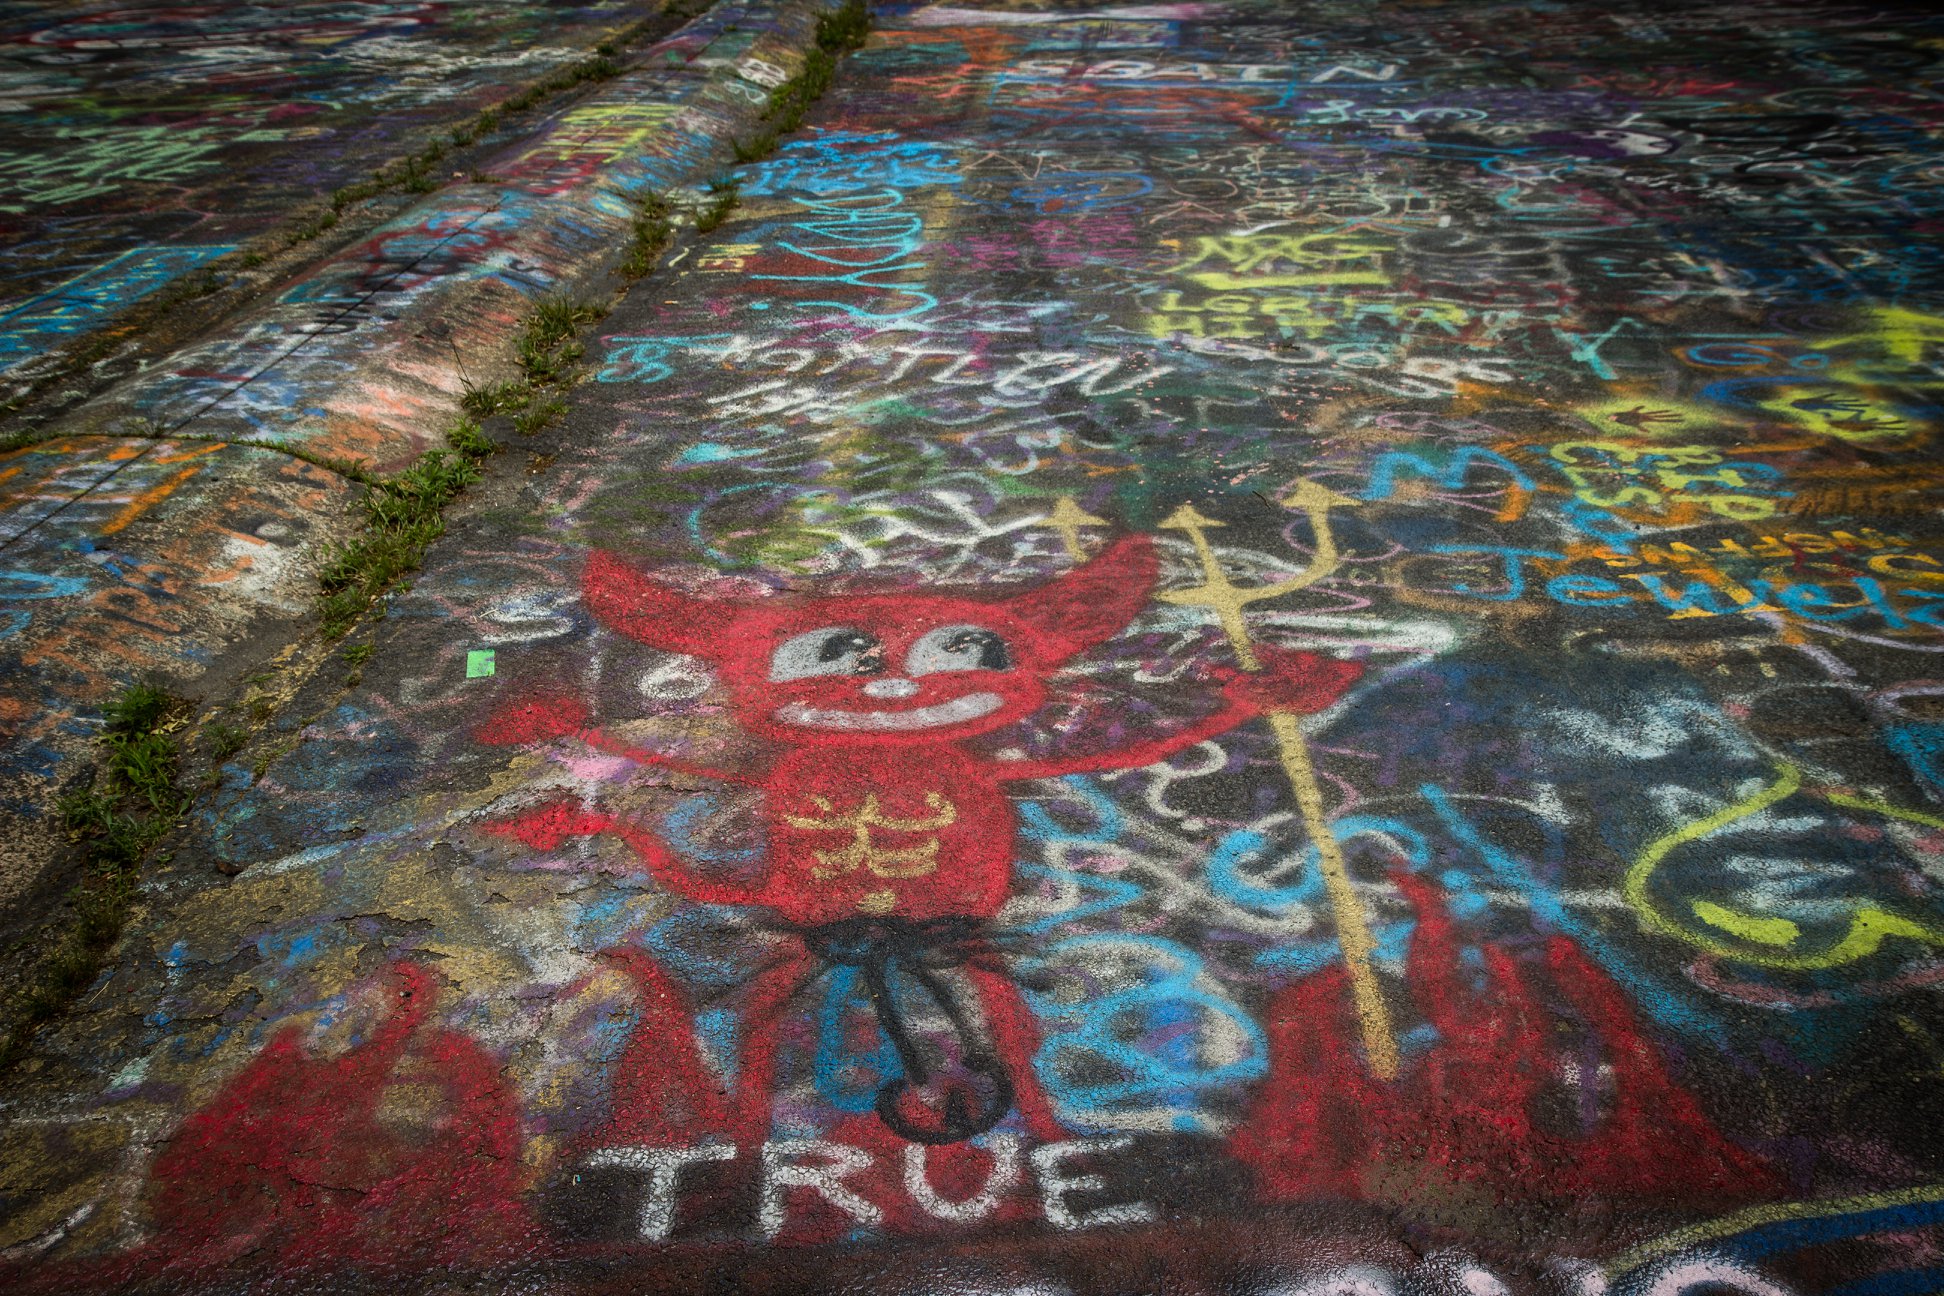 Centralia S Graffiti Highway Is Closed And Covered With Dirt To Drive Away Visitors During Coronavirus Pandemic Nepa Scene